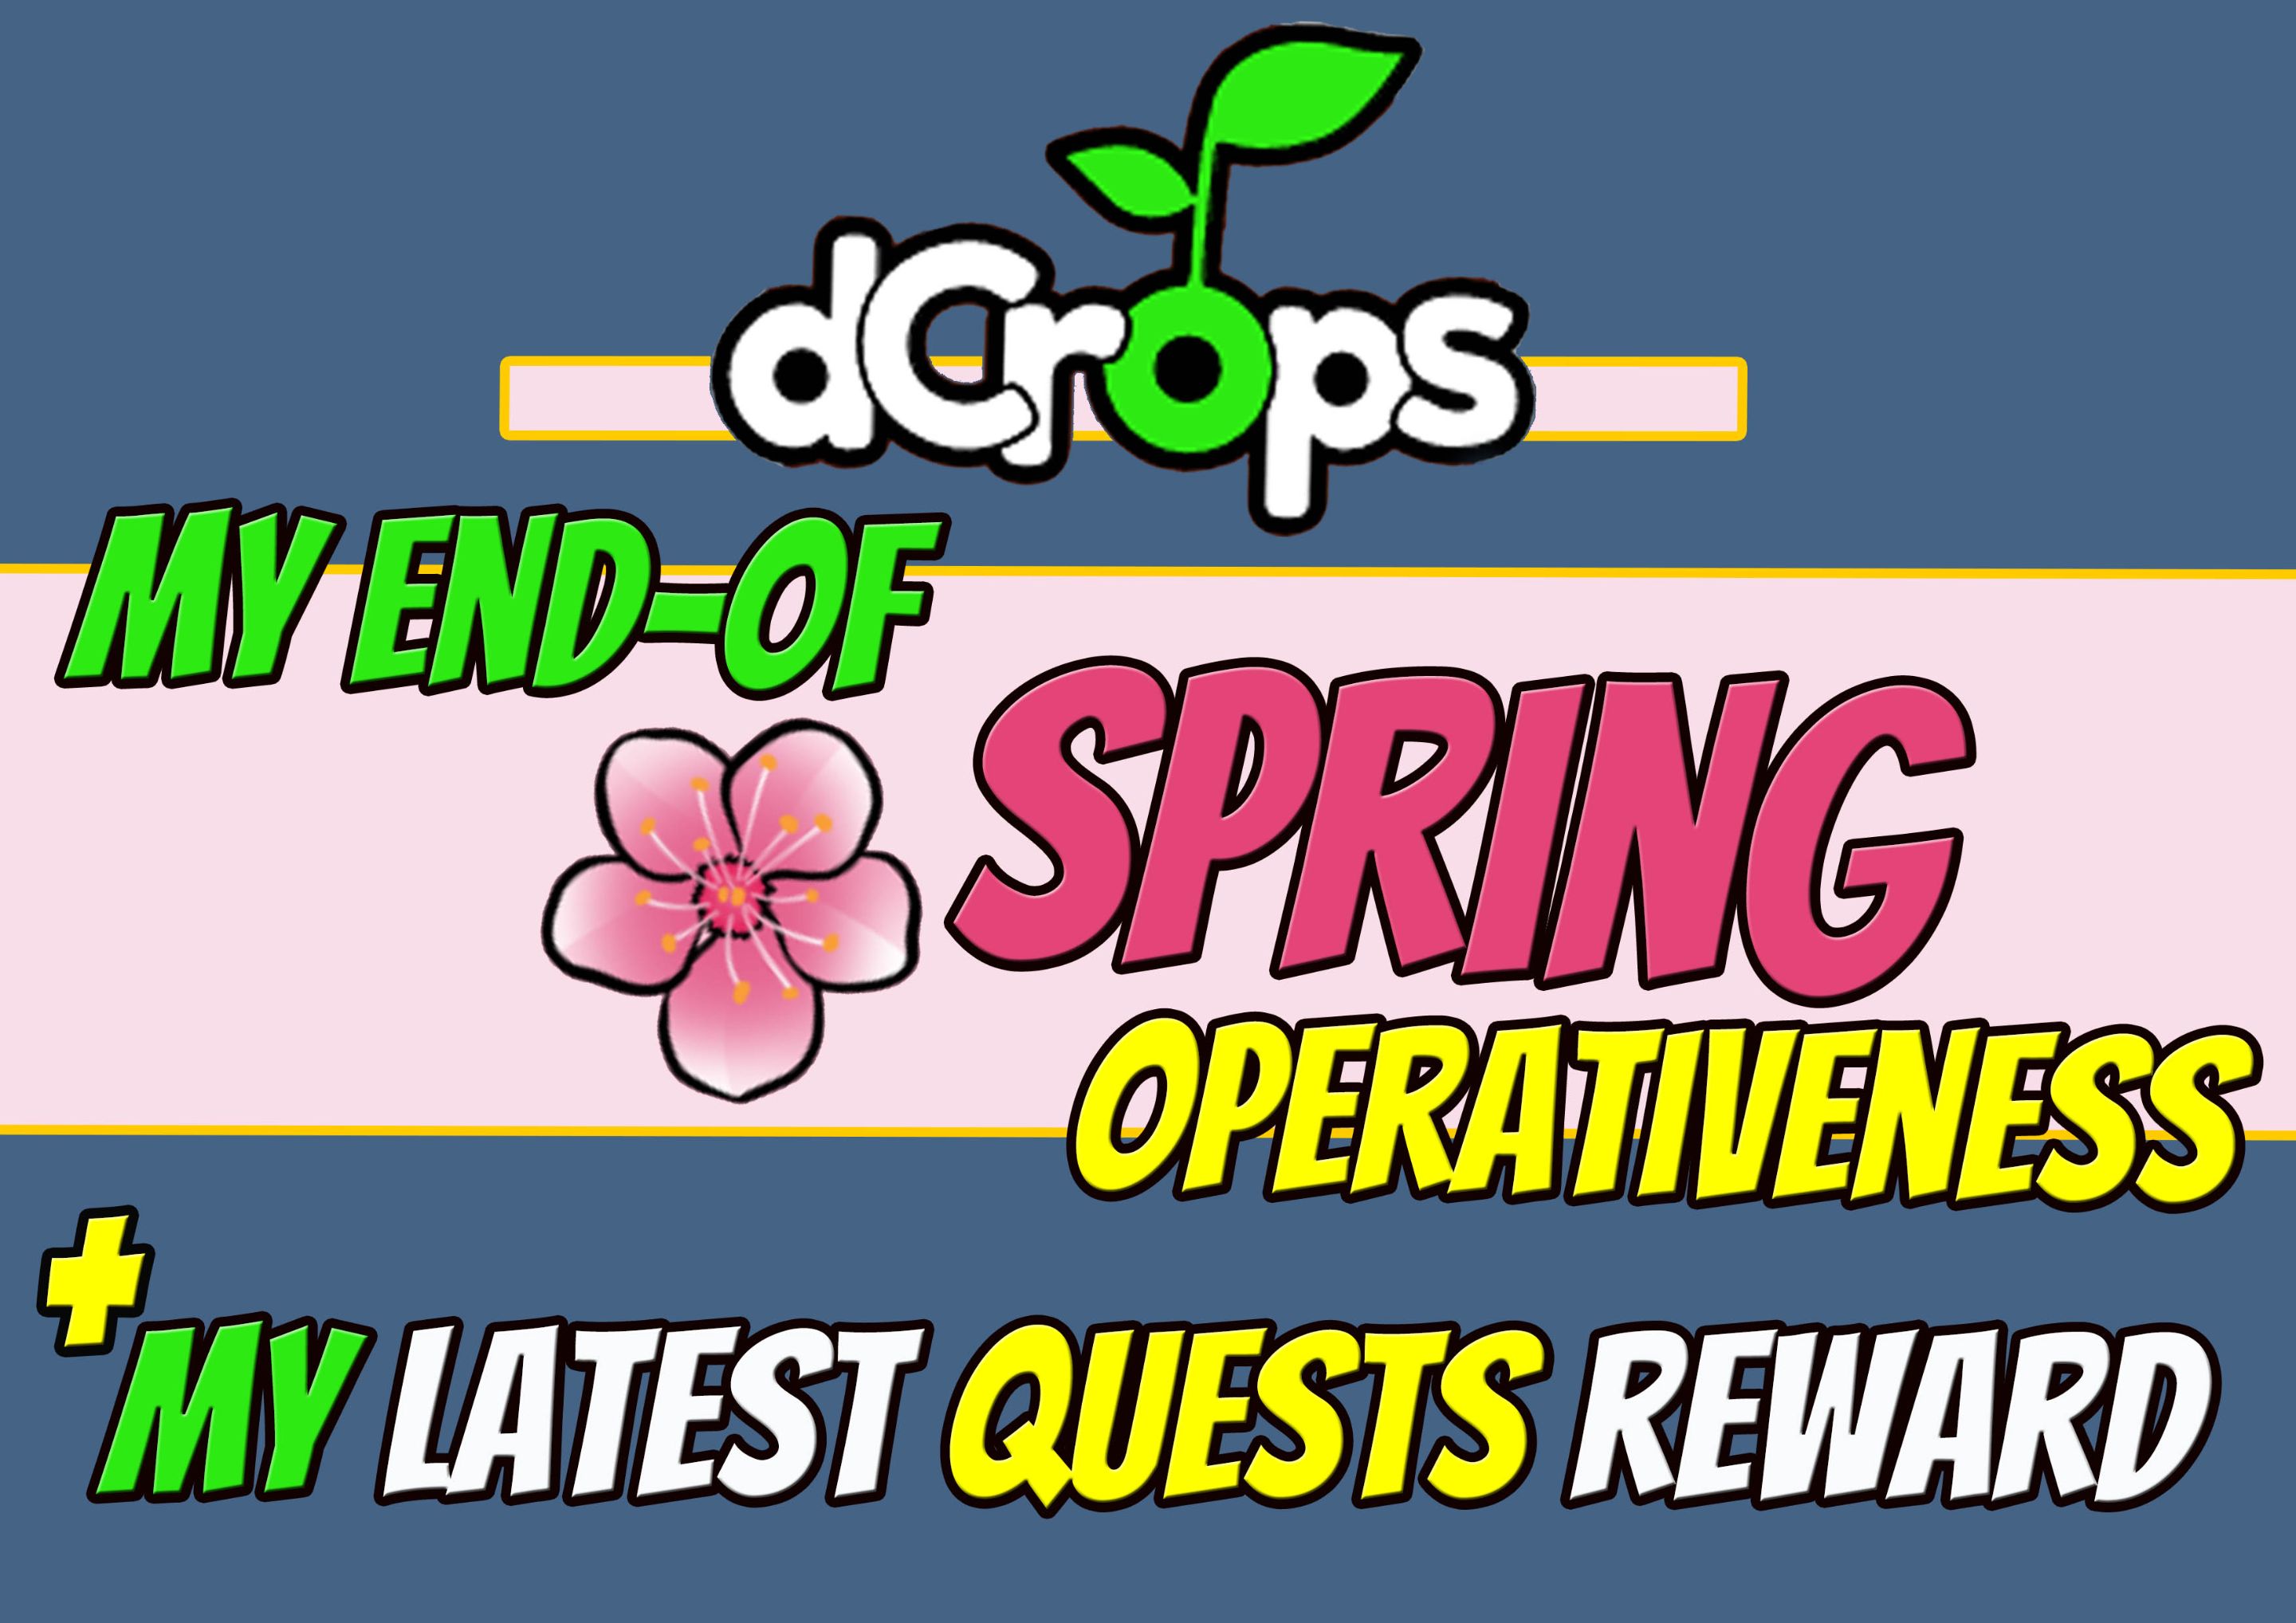 @libertycrypto27/dcrops-my-end-of-spring-operativeness--my-latest-quests-reward-engita